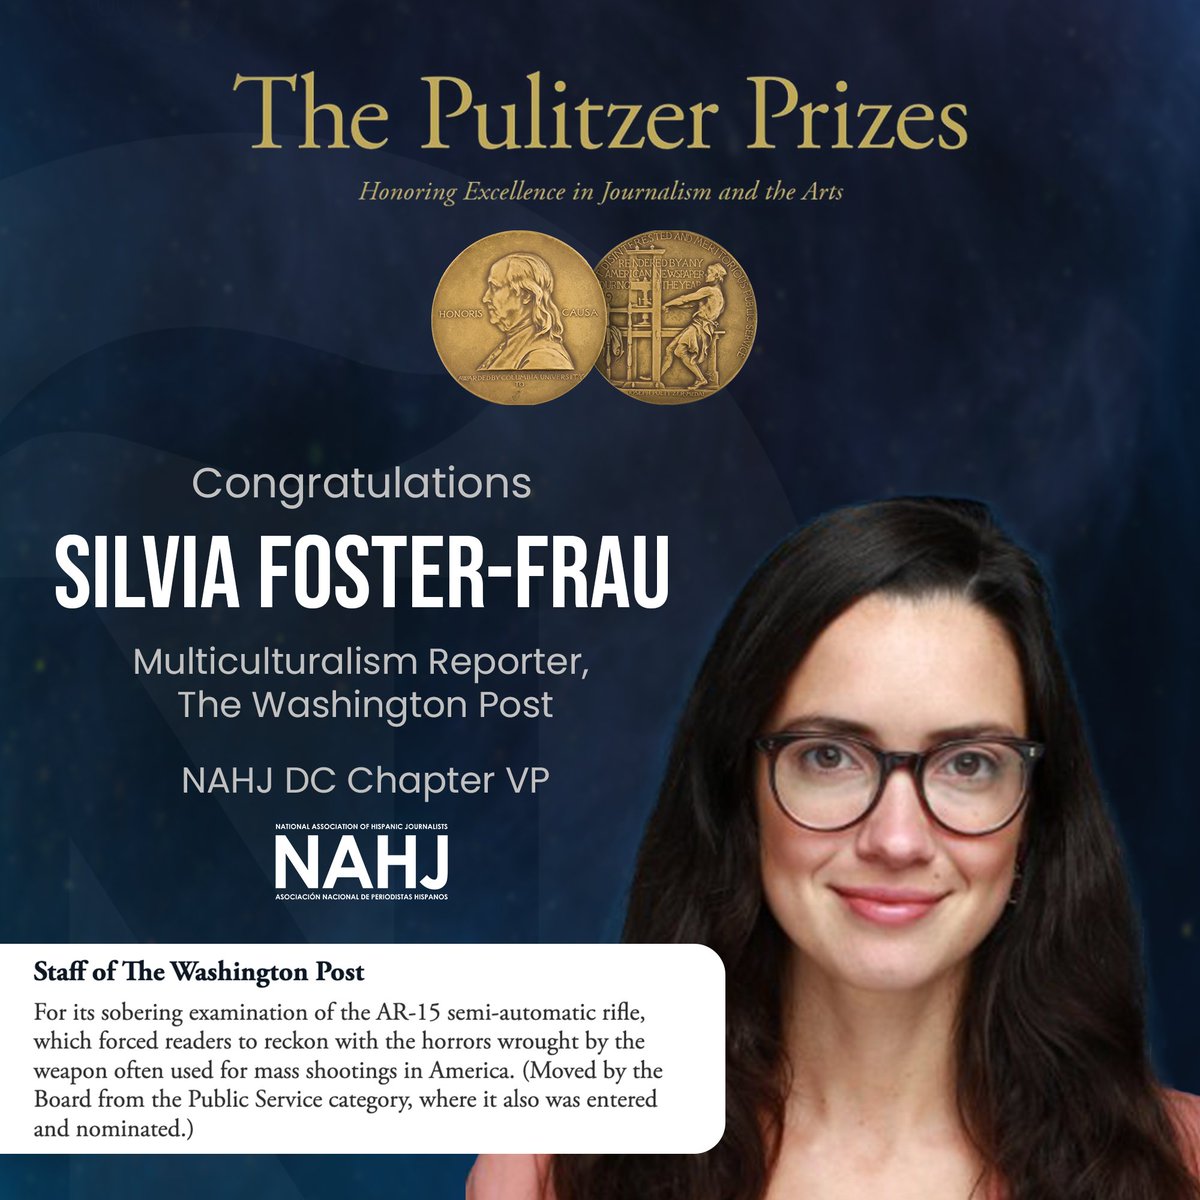 Please join us in congratulating @NAHJDC chapter VP @SilviaElenaFF for her incredible achievement of being named a 2024 Pulitzer Prize winner! Congrats to Silvia and her team at @washingtonpost 👏 @PulitzerPrizes #MoreLatinosInNews